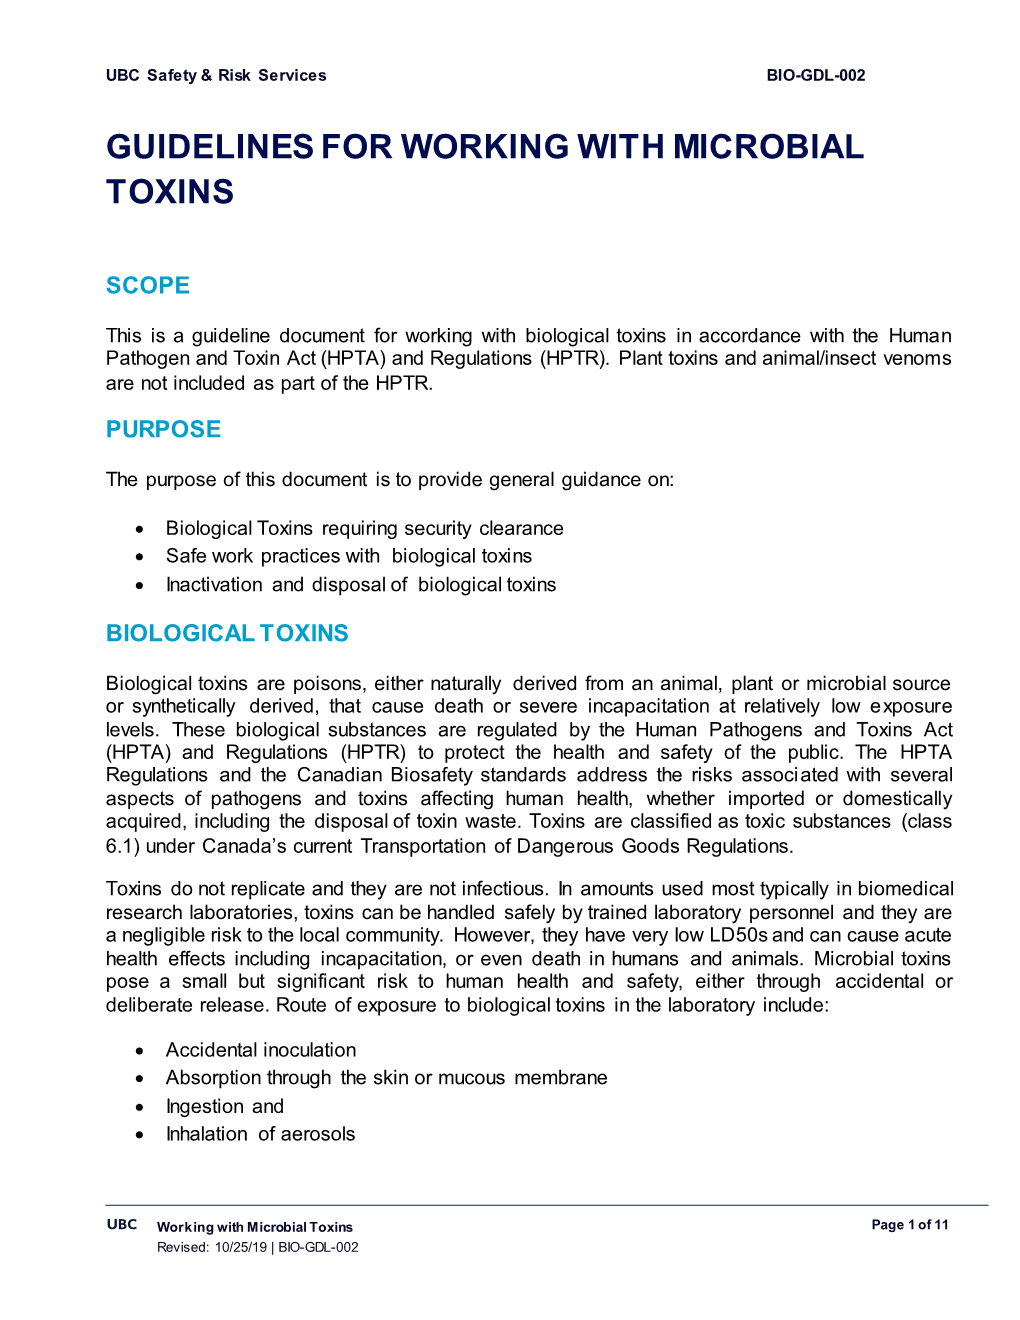 BIO-GDL-002 Guidelines for Working with Microbial Toxins